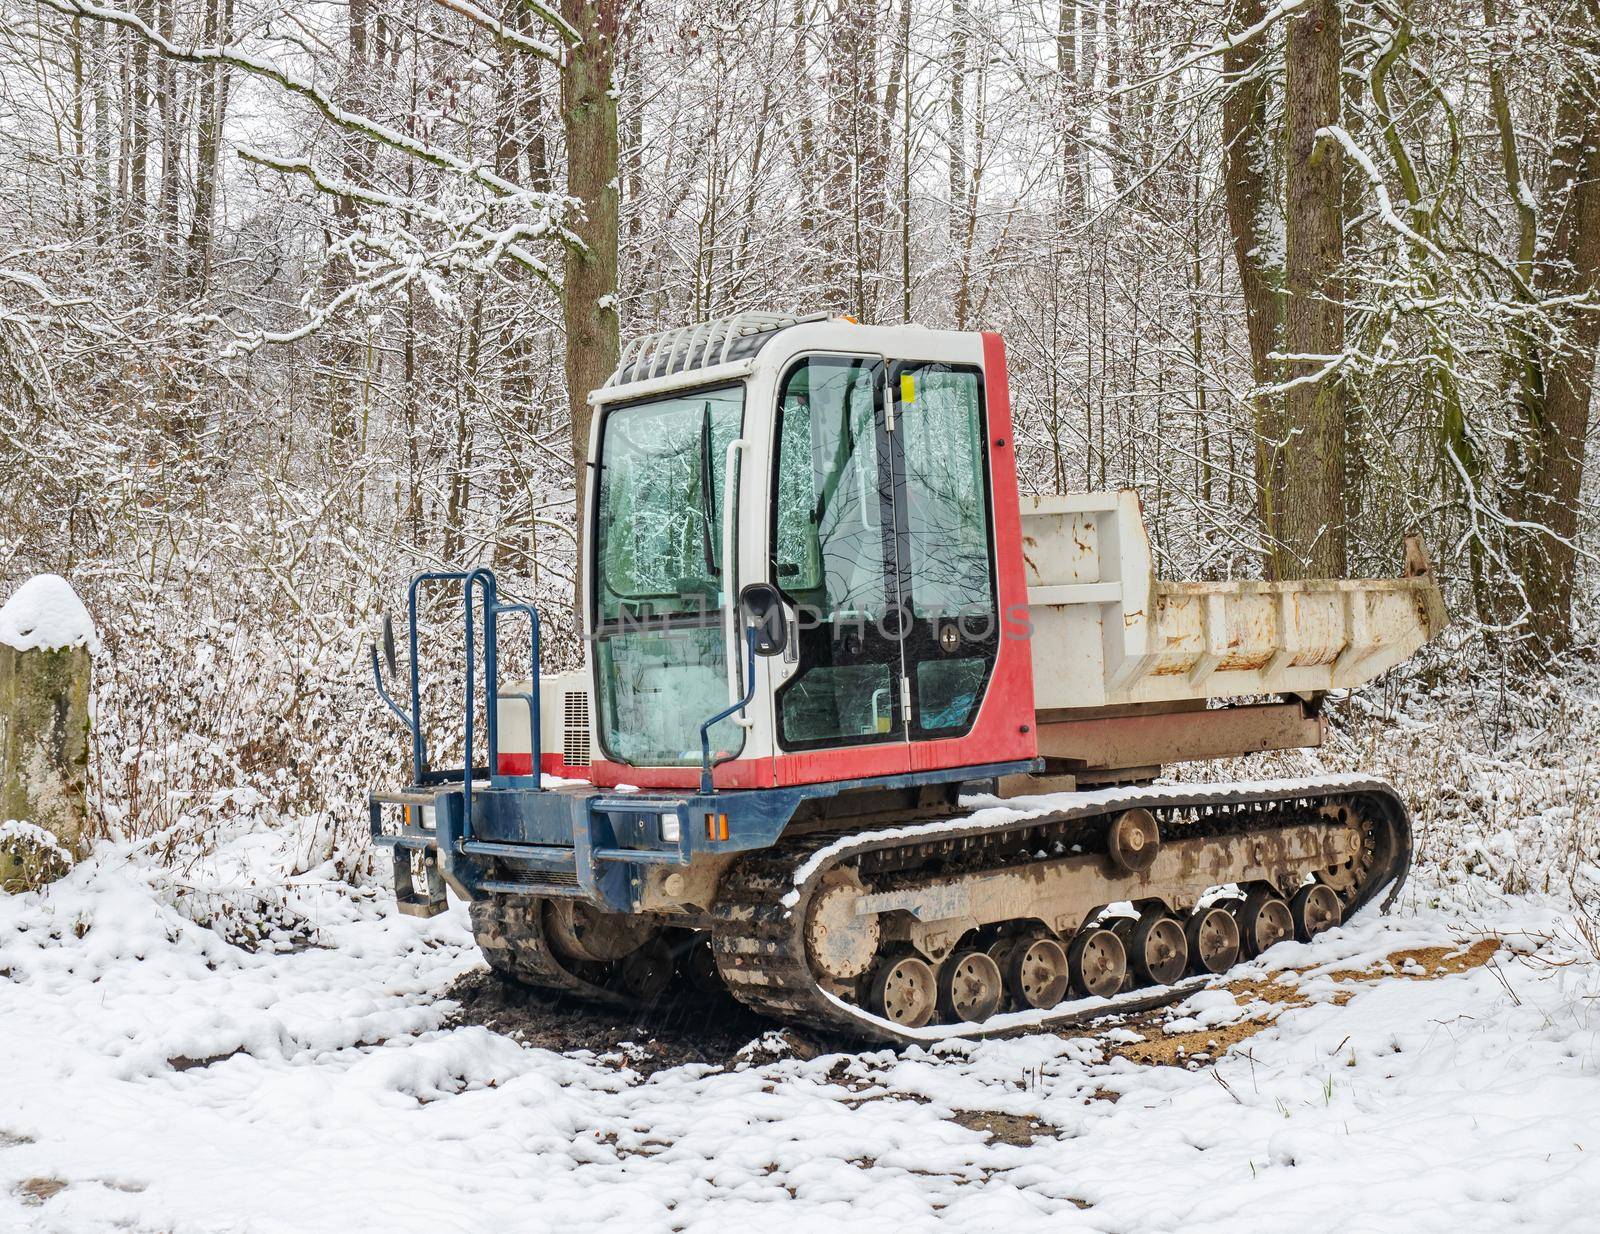 Small Dumper Tracked Truck with Muddy Chassis. The transporter waiting in the snowy forest